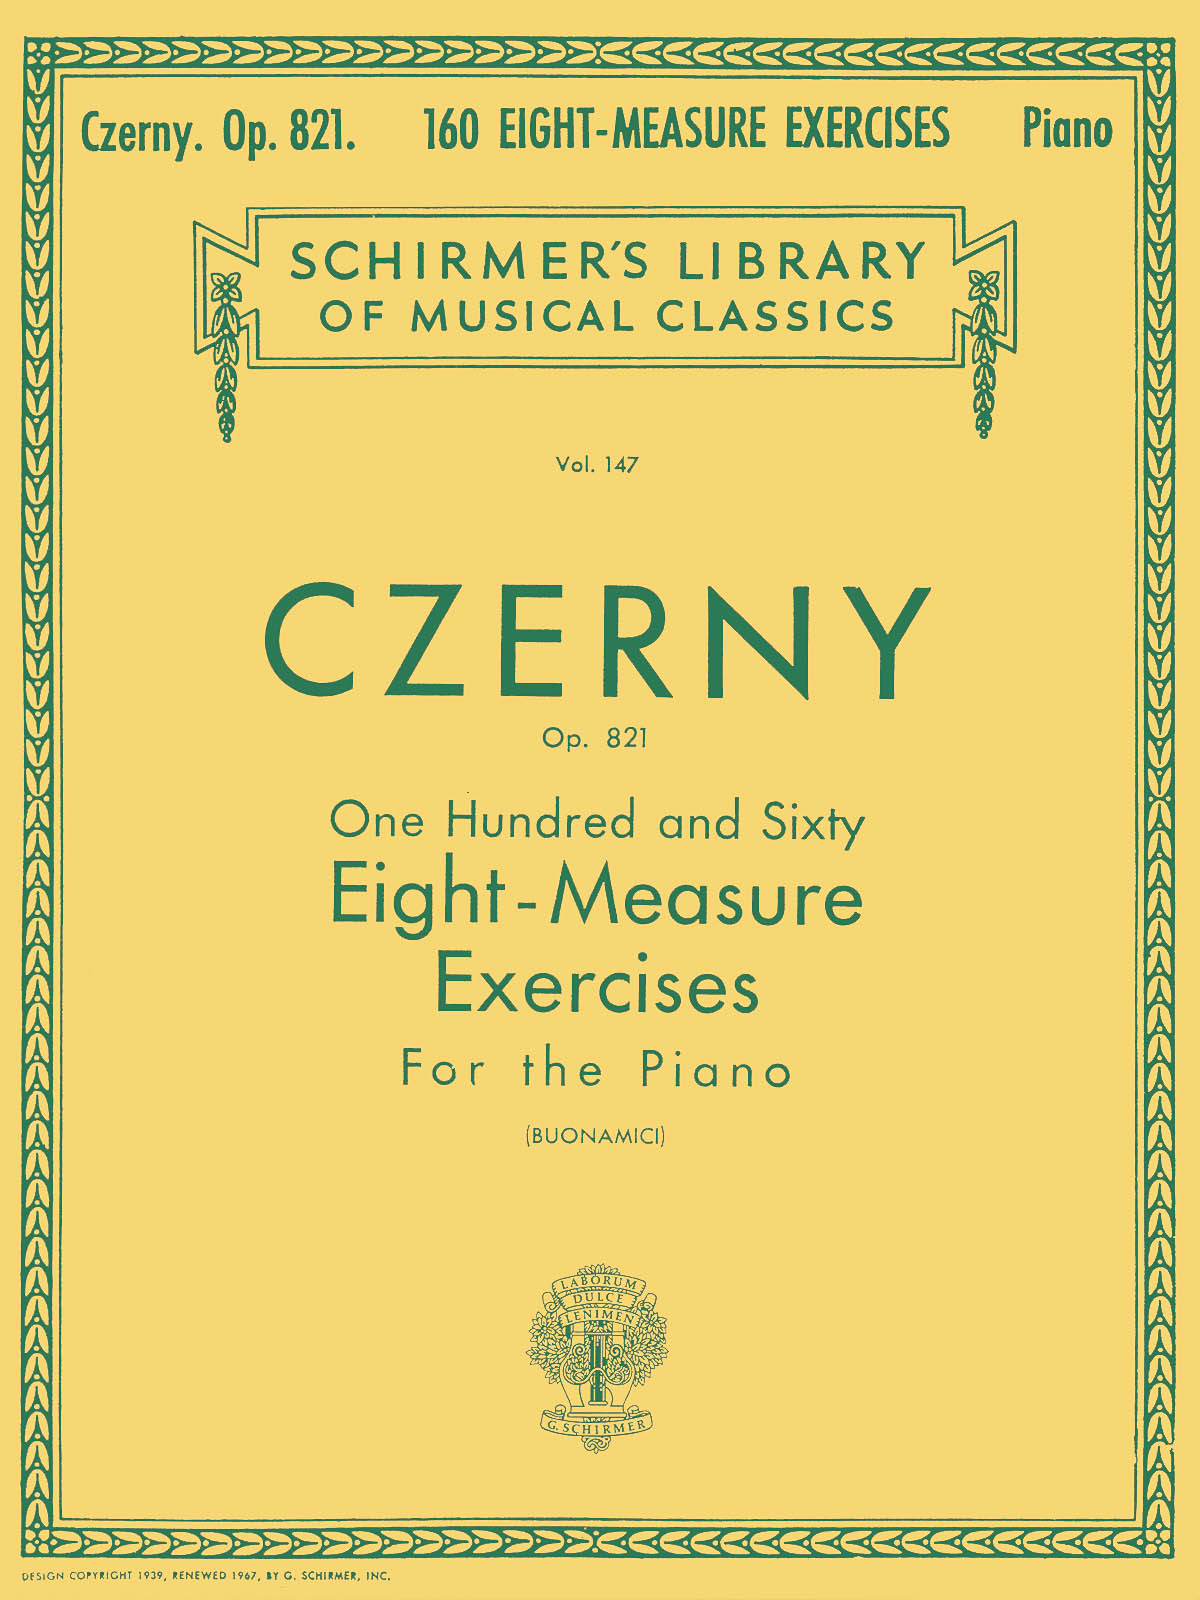 Carl Czerny: 160 Eight-Measure Exercises for Piano Op.821